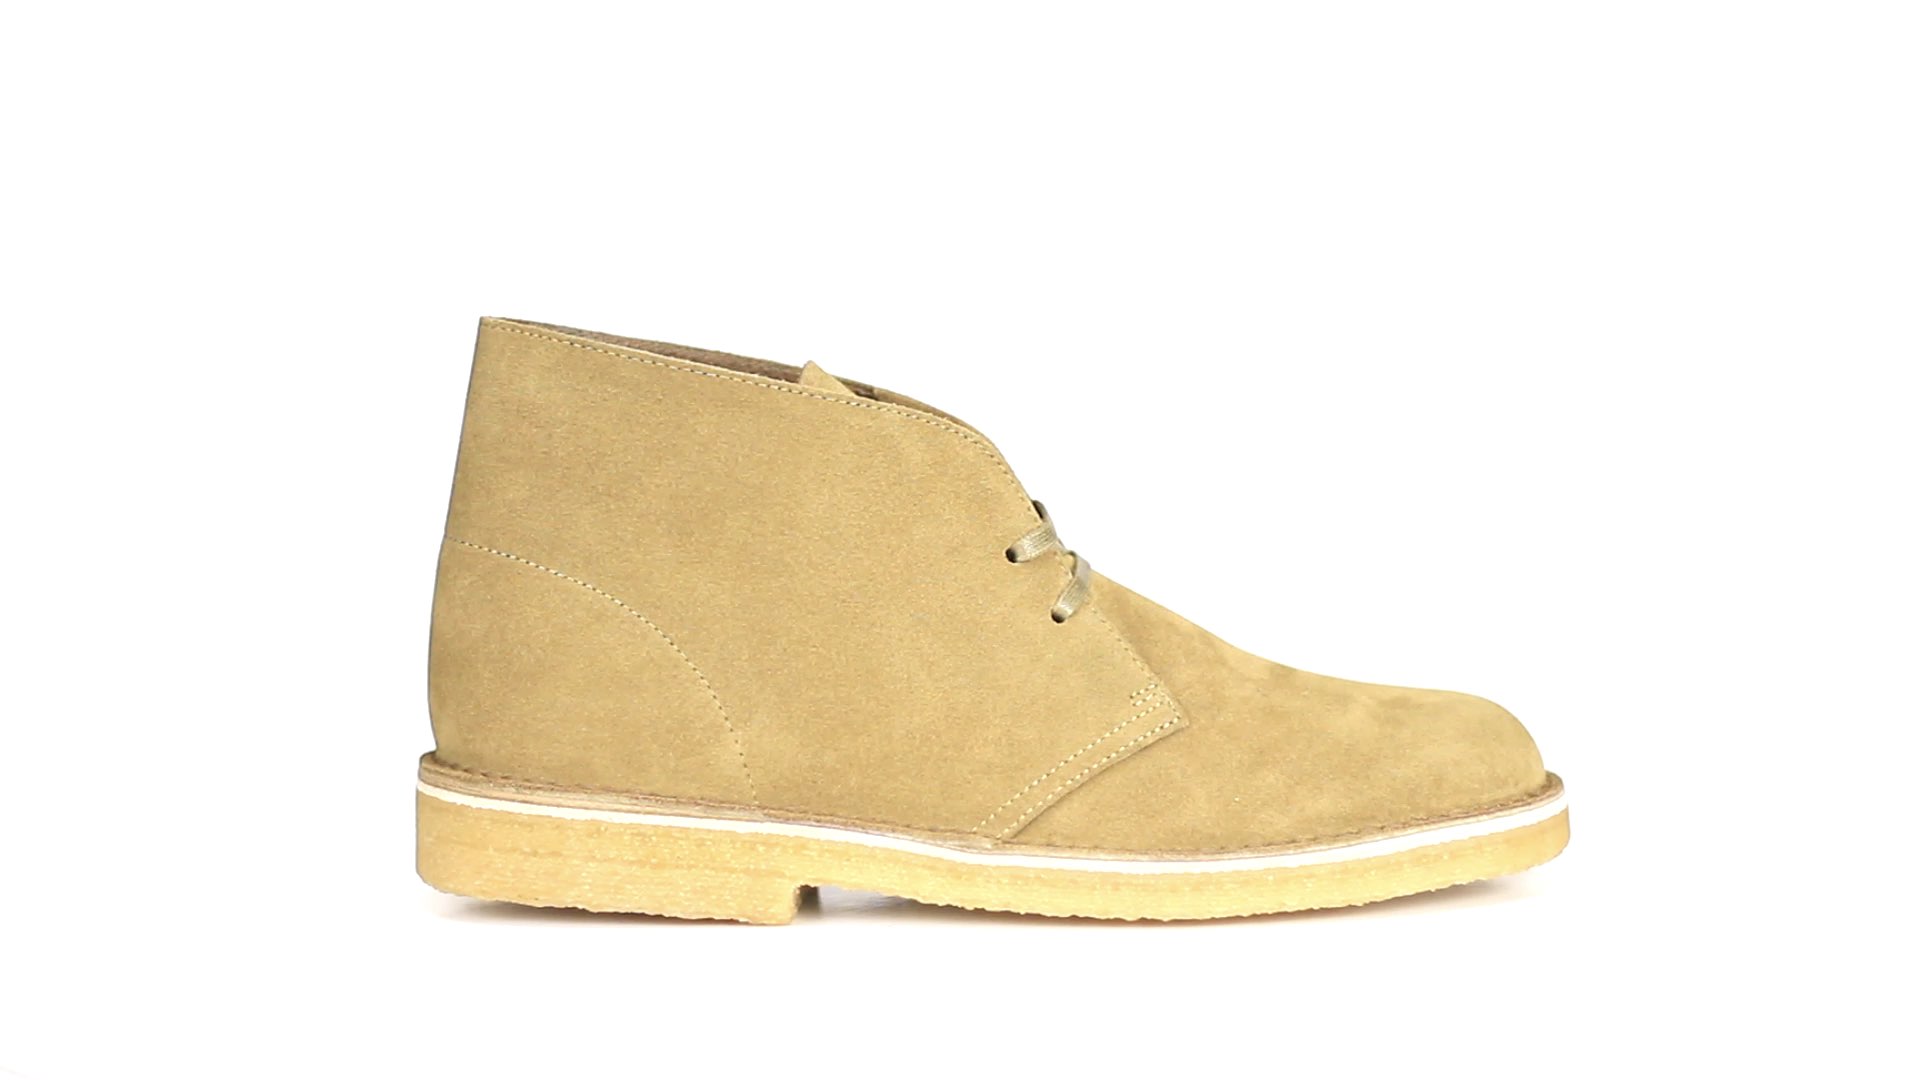 035 Desert boots to wear with jeans